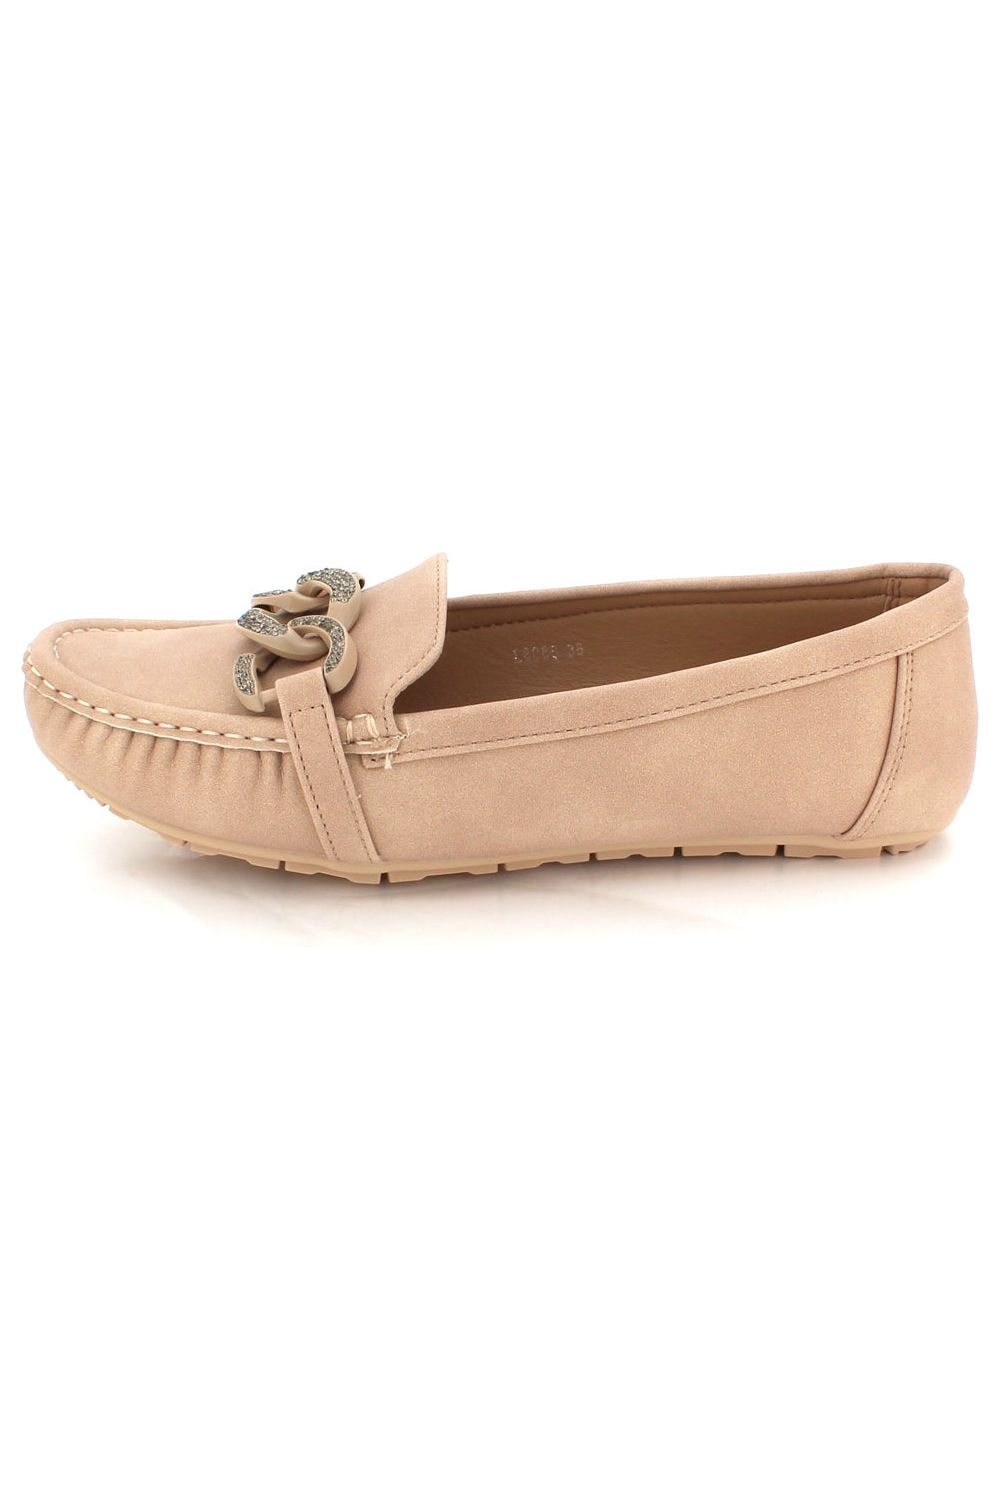 Comfort Casual Lightweight Everyday Office Work Moccasins Loafer L8087